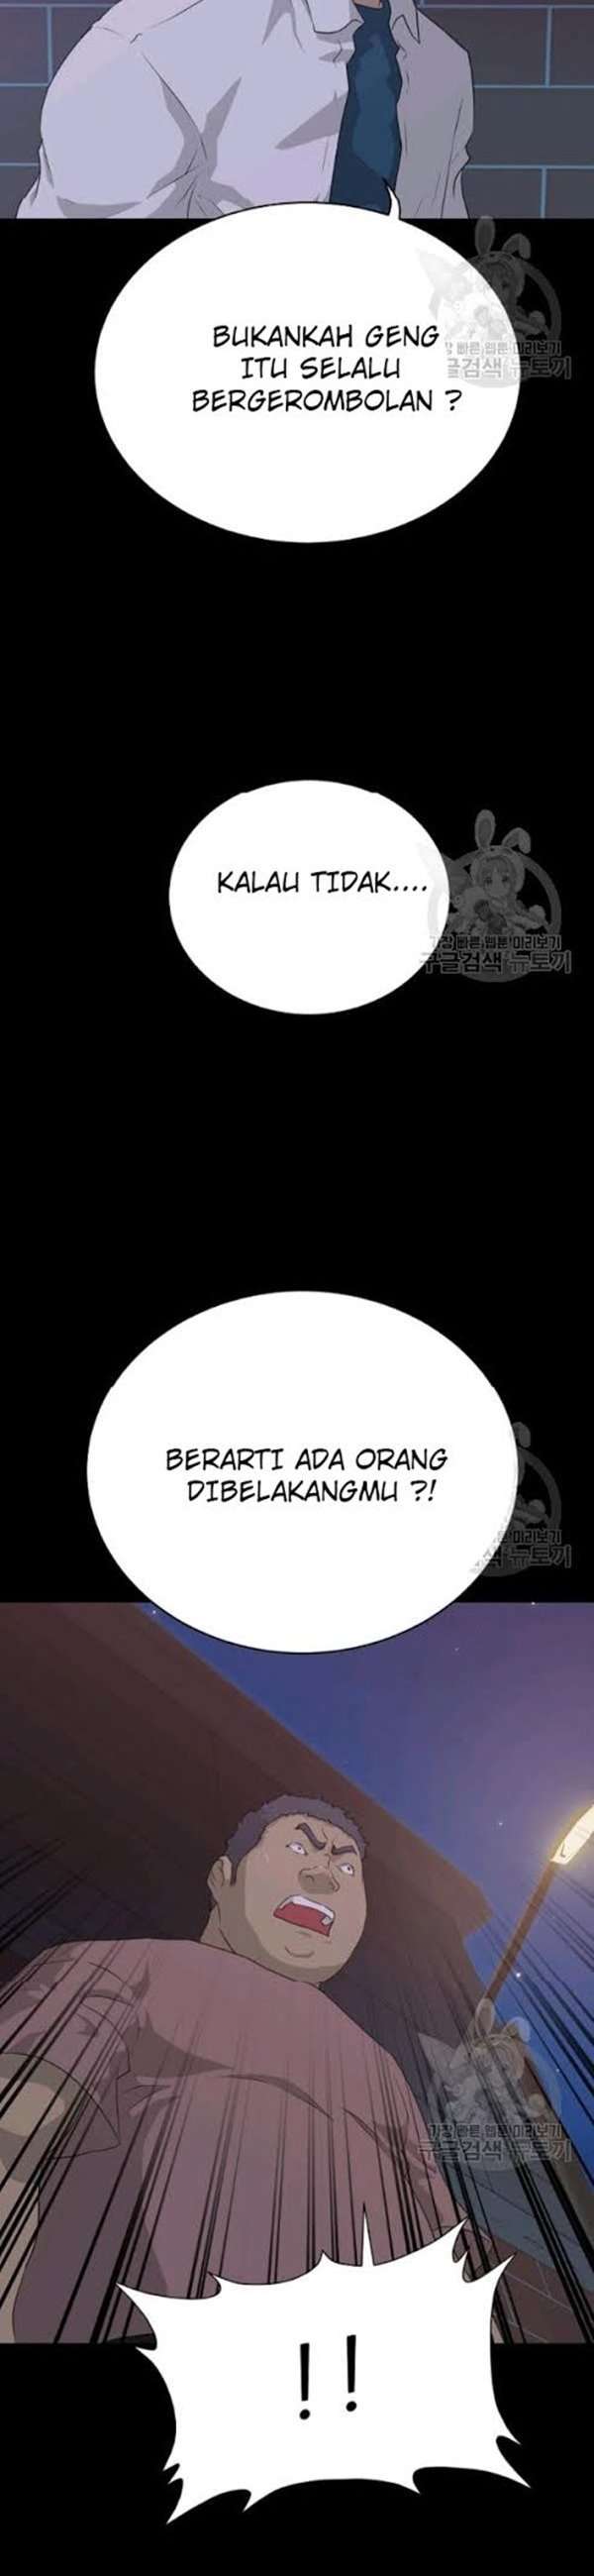 Trigger Chapter 55